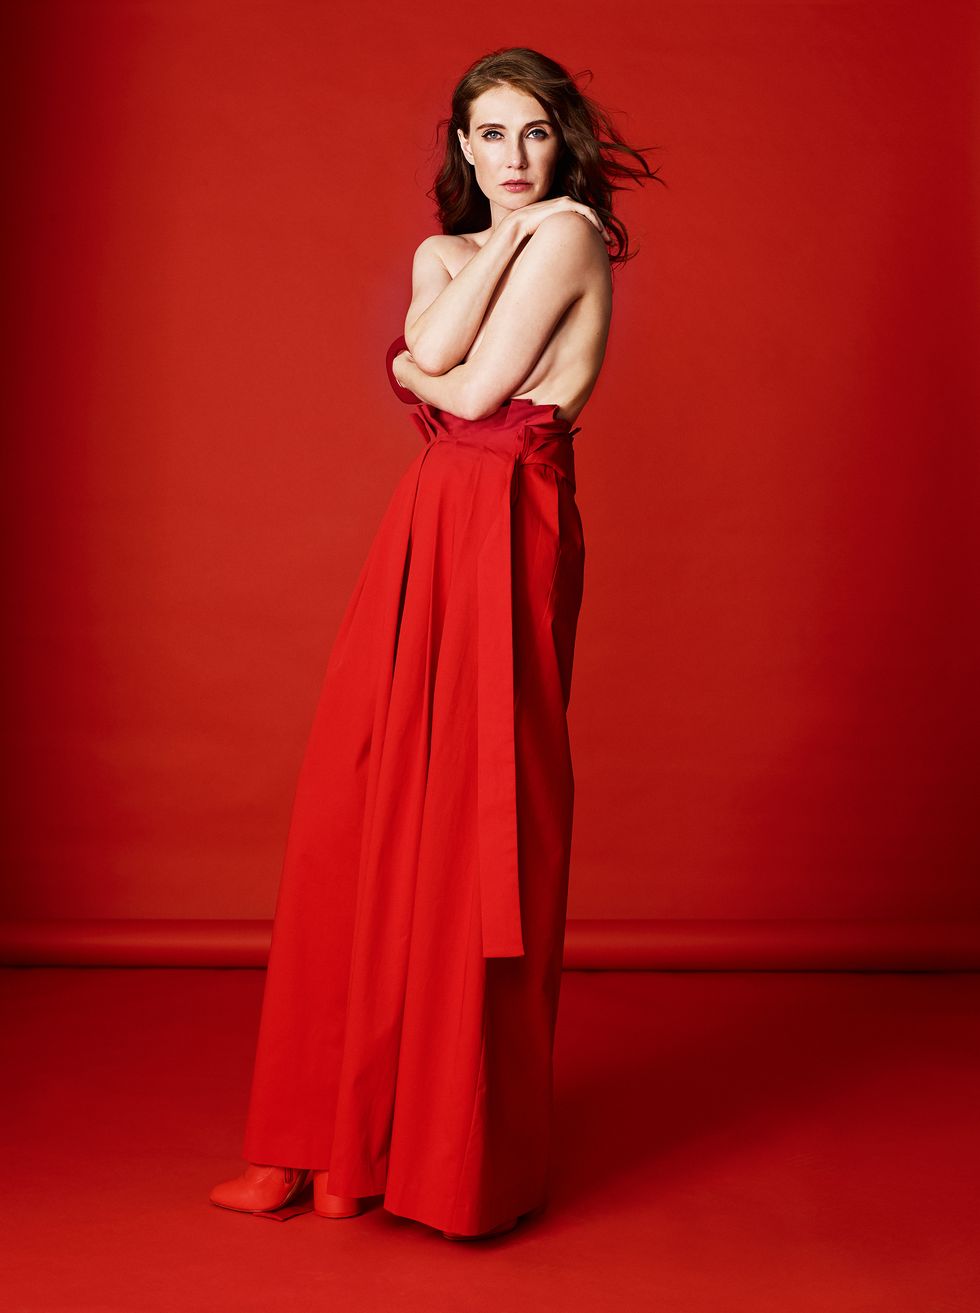 Red, Clothing, Dress, Fashion model, Gown, Shoulder, Formal wear, Beauty, Fashion, Photo shoot, 